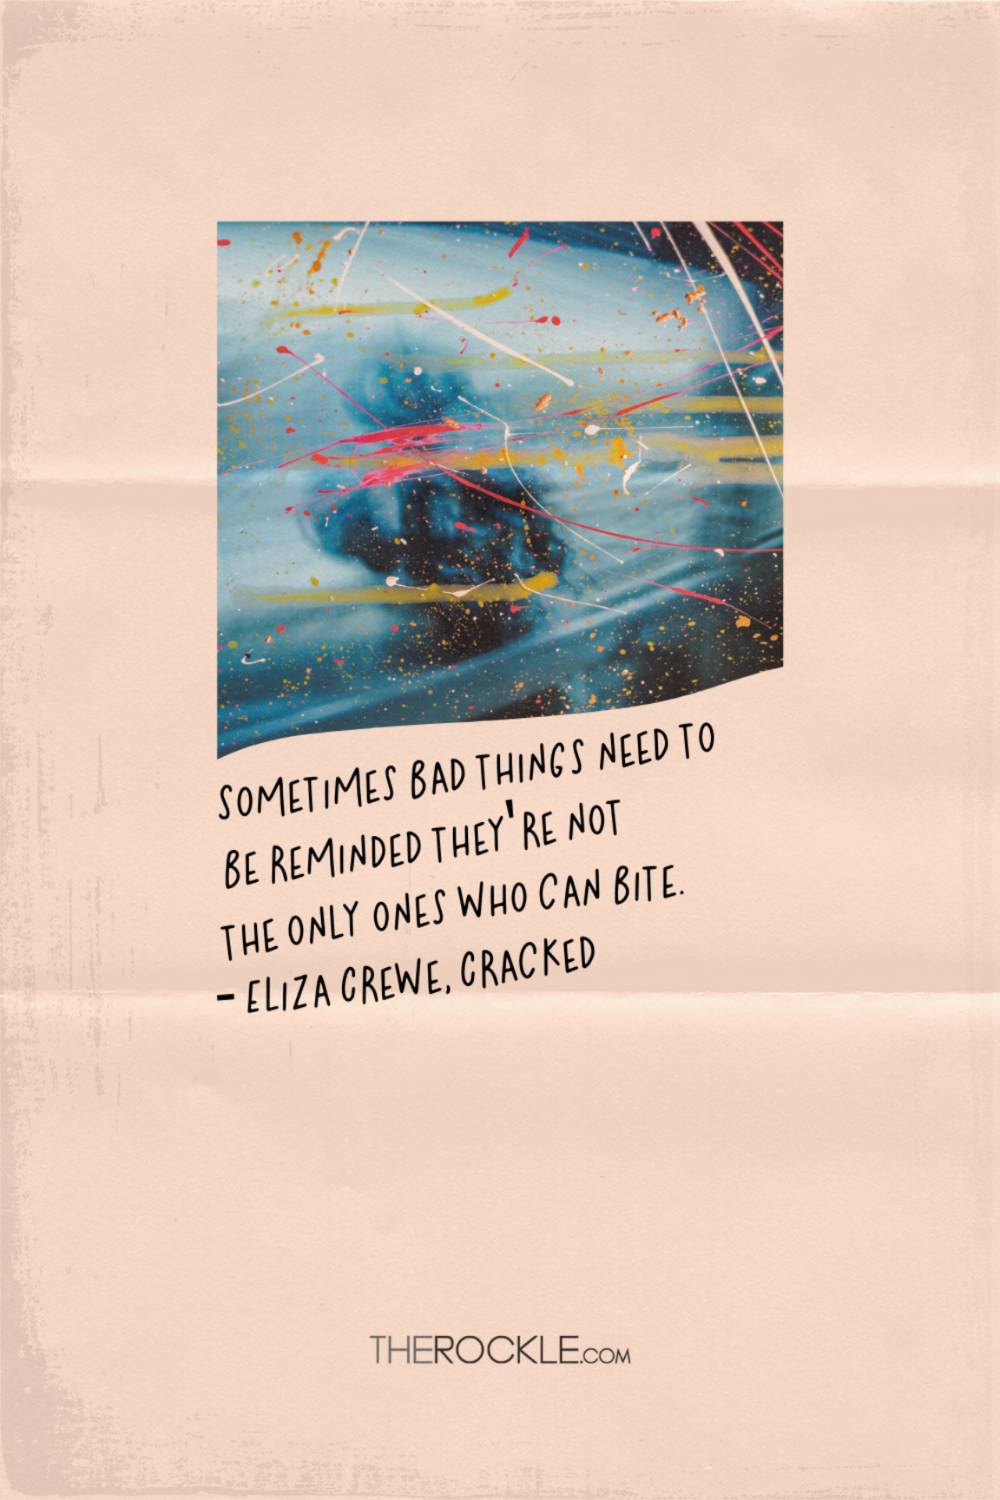 Quote from Eliza Crew's book Cracked